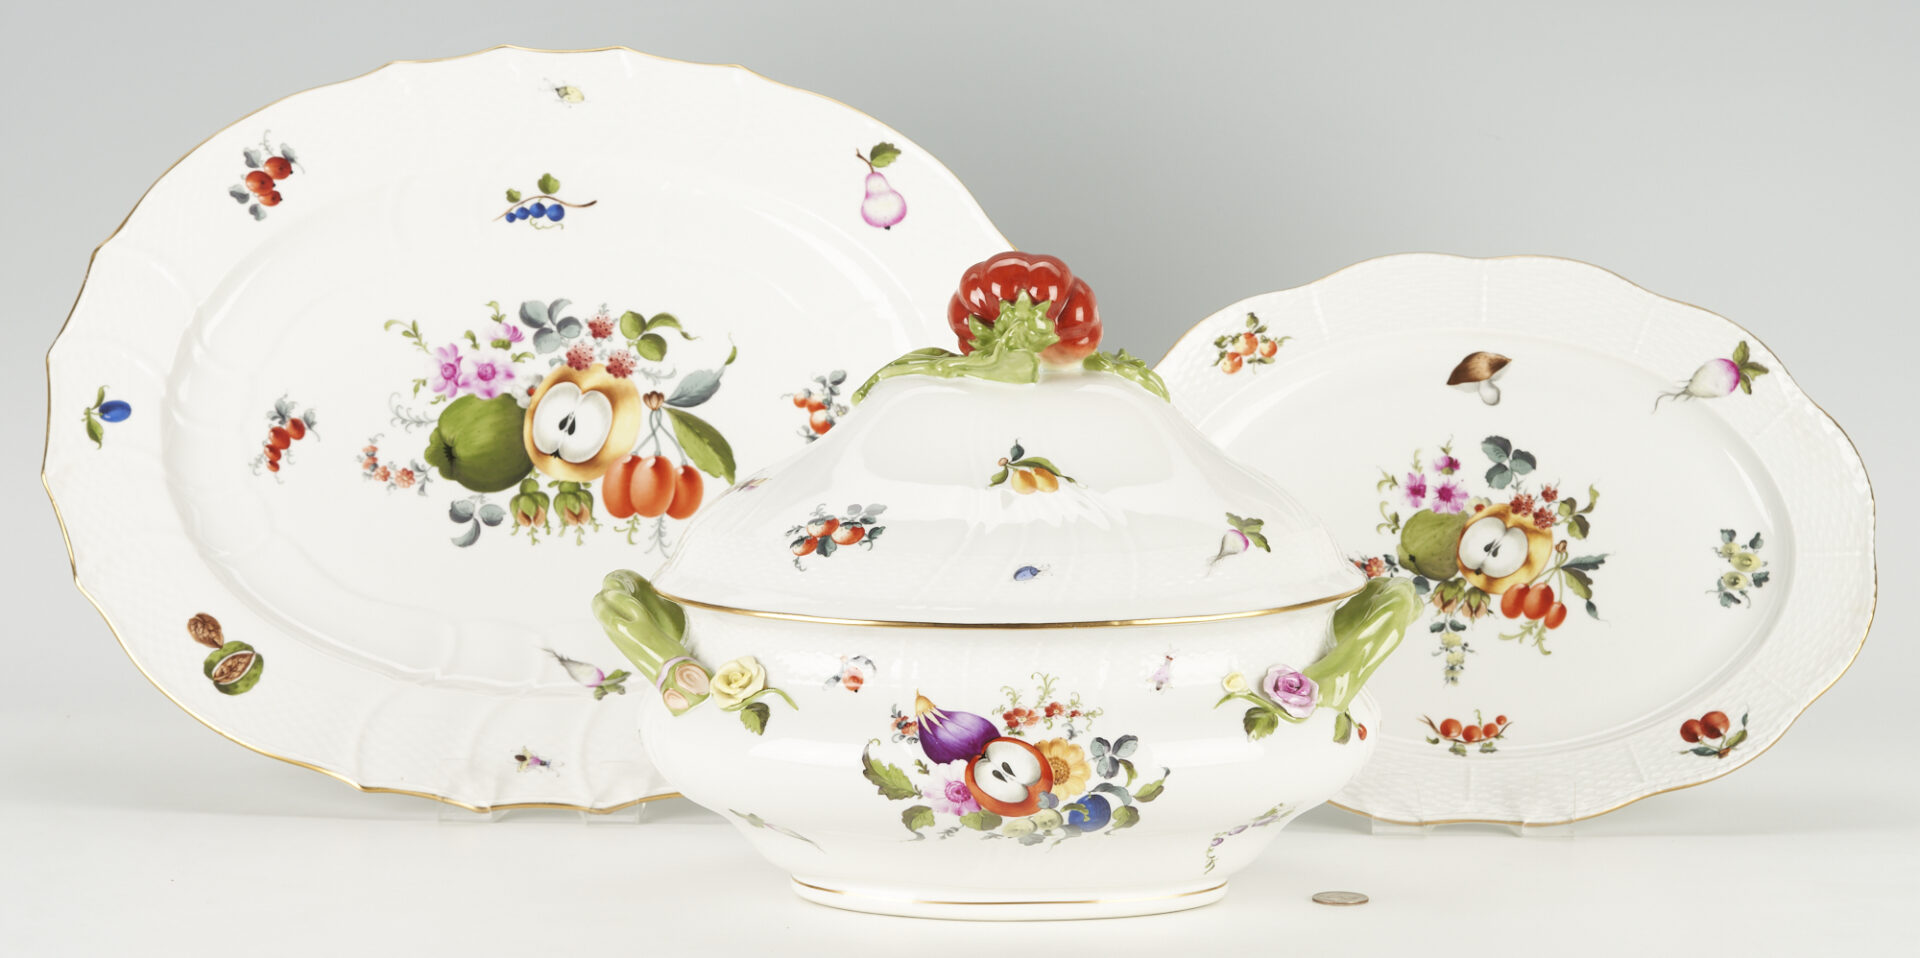 Lot 217: 132 Pieces of Herend Porcelain, Fruits & Flowers Pattern